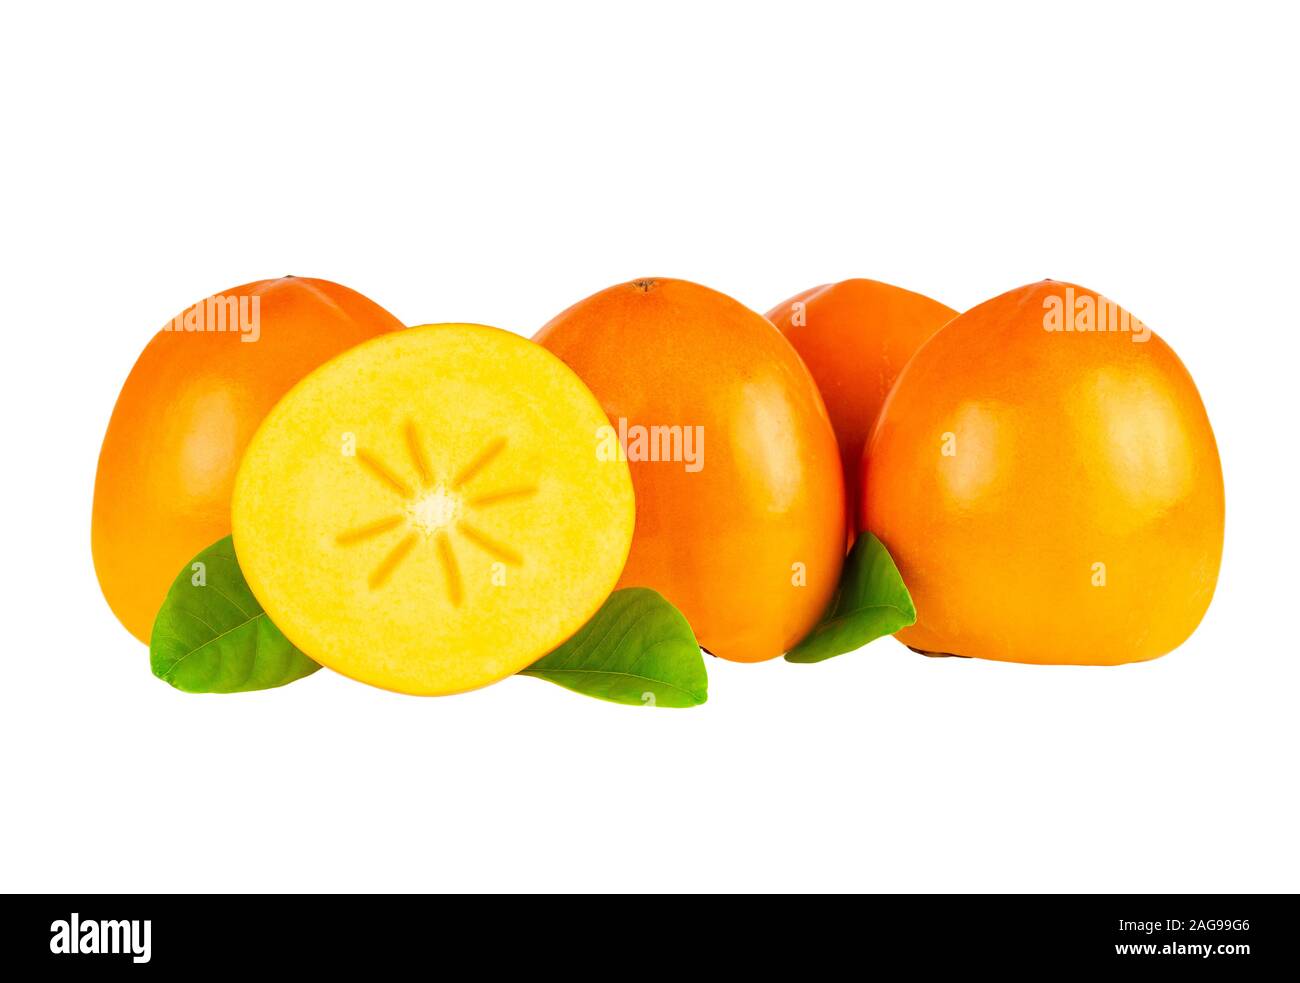 Persimmon Whole And Halved Fruit Isolated On White Background. Persimmon Fruits Retouched Image. Stock Photo